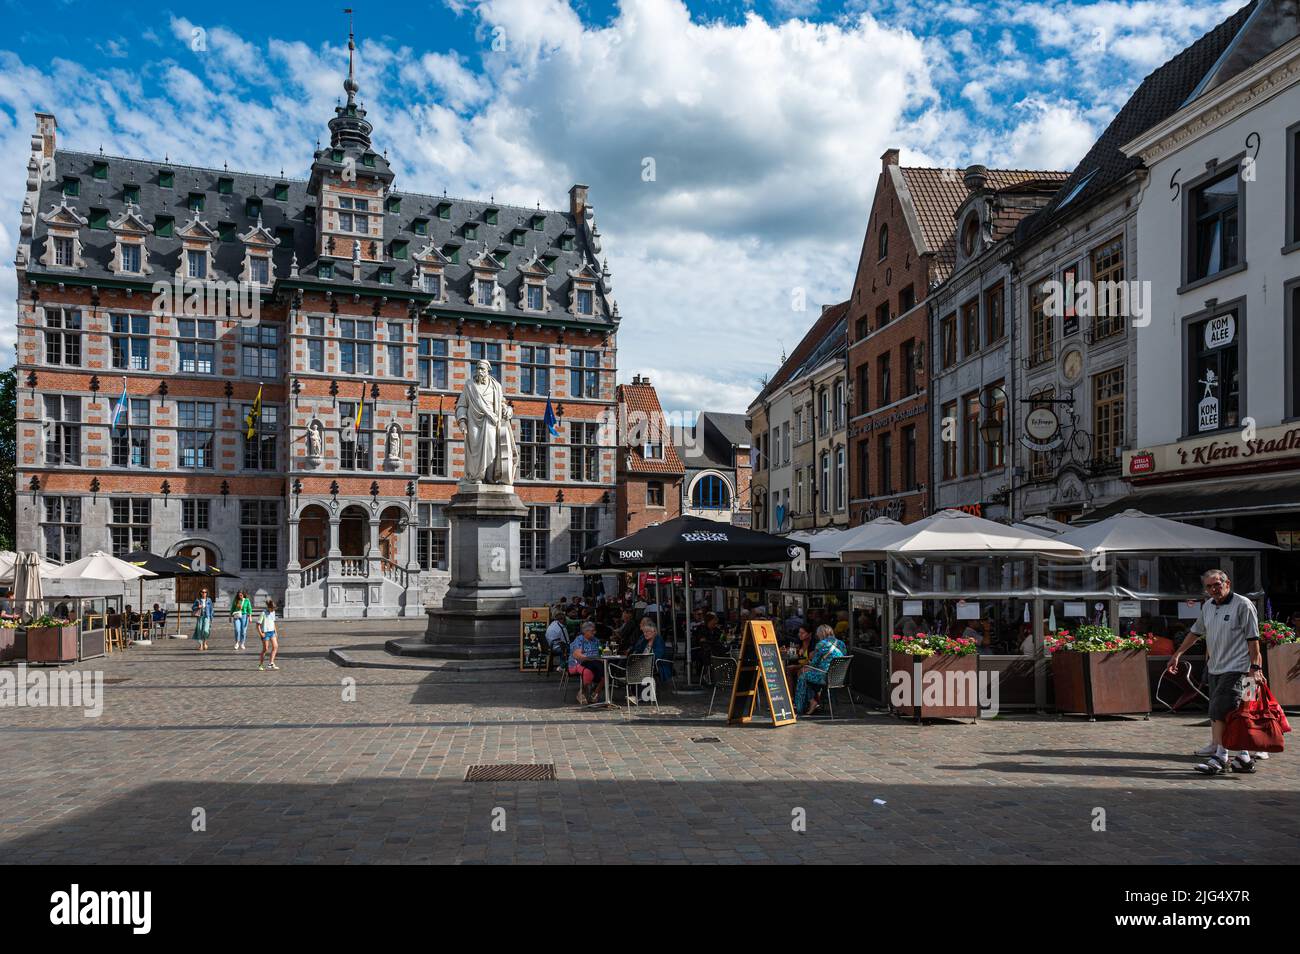 Halle, Flemish Brabant Region, Belgium,  07 02 2022 - Old market square with terraces in the summer sun Stock Photo